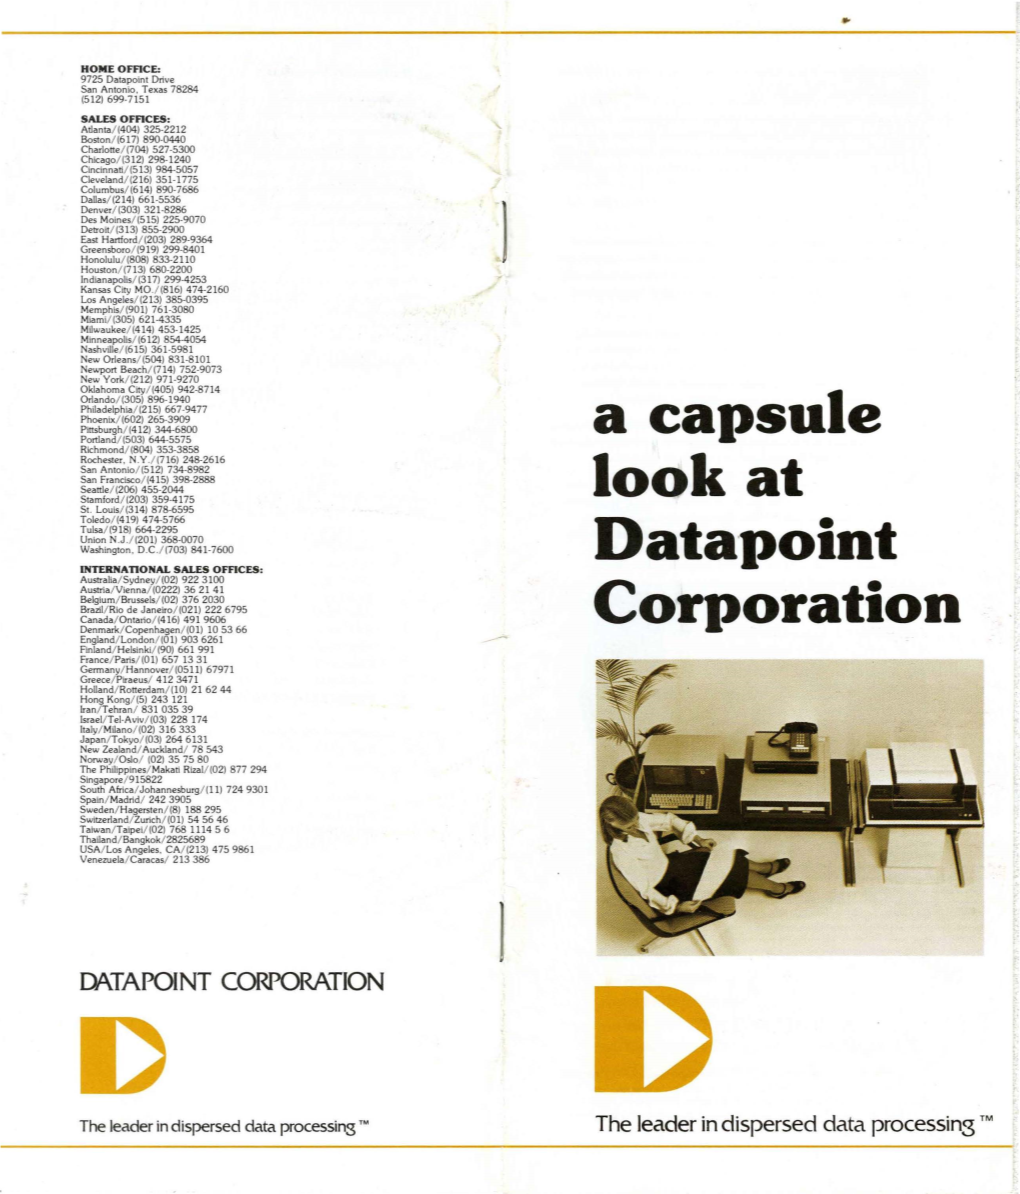 A Capsule Look at Datapoint Corporation